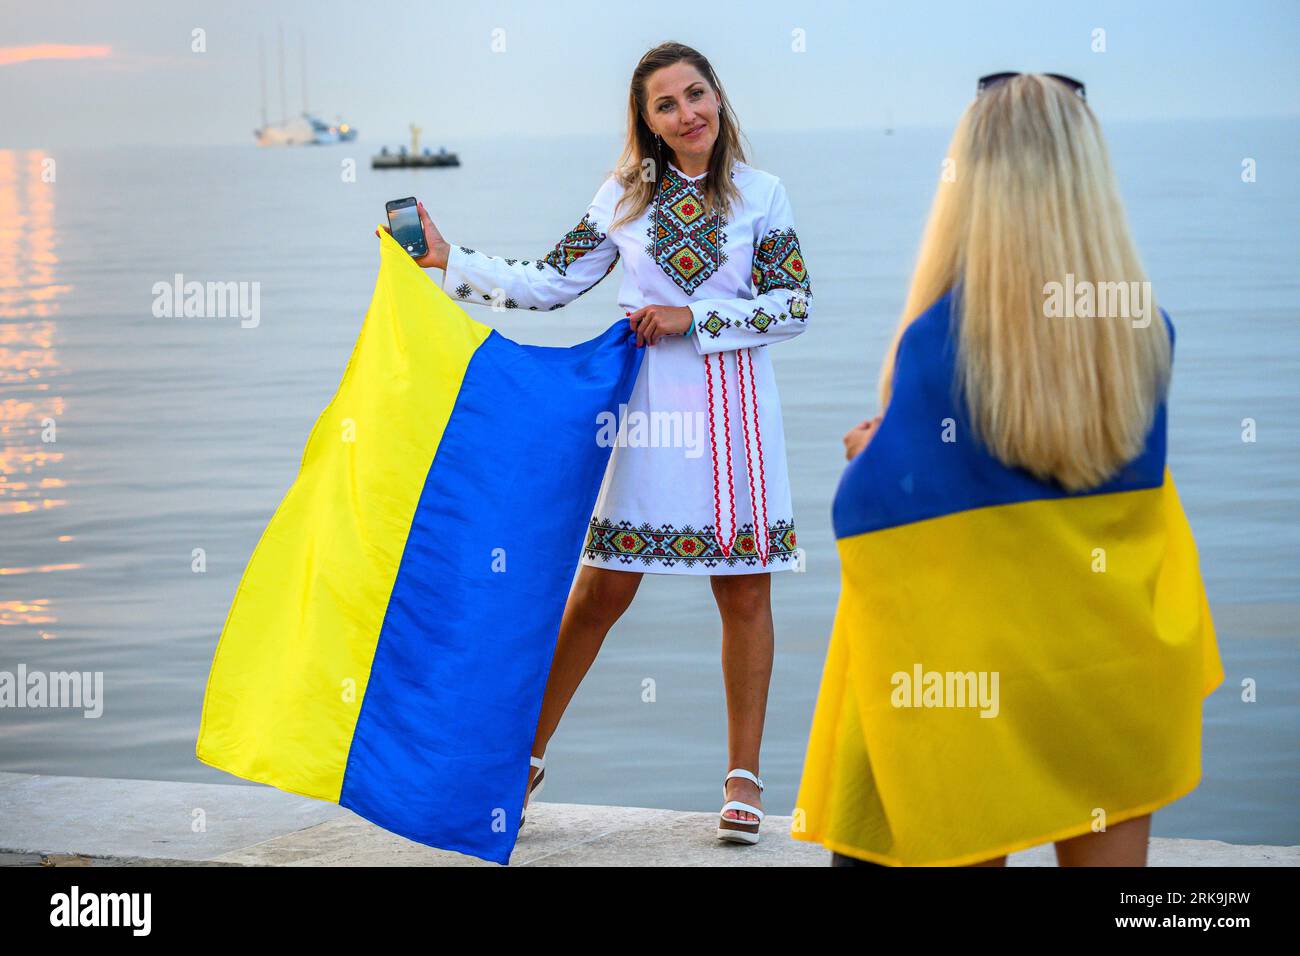 Trieste, Italy, 24 August 2023. Ukrainian women display their national flag to mark Ukraine's 32nd Independence Day in the Adriatic Sea port of Trieste, Italy. Ukrainian residents held a demonstration in the central Piazza Unità d'Italia was part of a 'Chain of Unity' organized by Ukrainian communities worldwide to show their resilience, dignity and support for their country, invaded by Russia exactly 18 months ago. Far away in the horizon is the largest megayacht in the world, the 530 million euro Sailing Yacht A belonging to Russian oligarch Andrey Igorevich Melnichenko, seized in March 20 Stock Photo